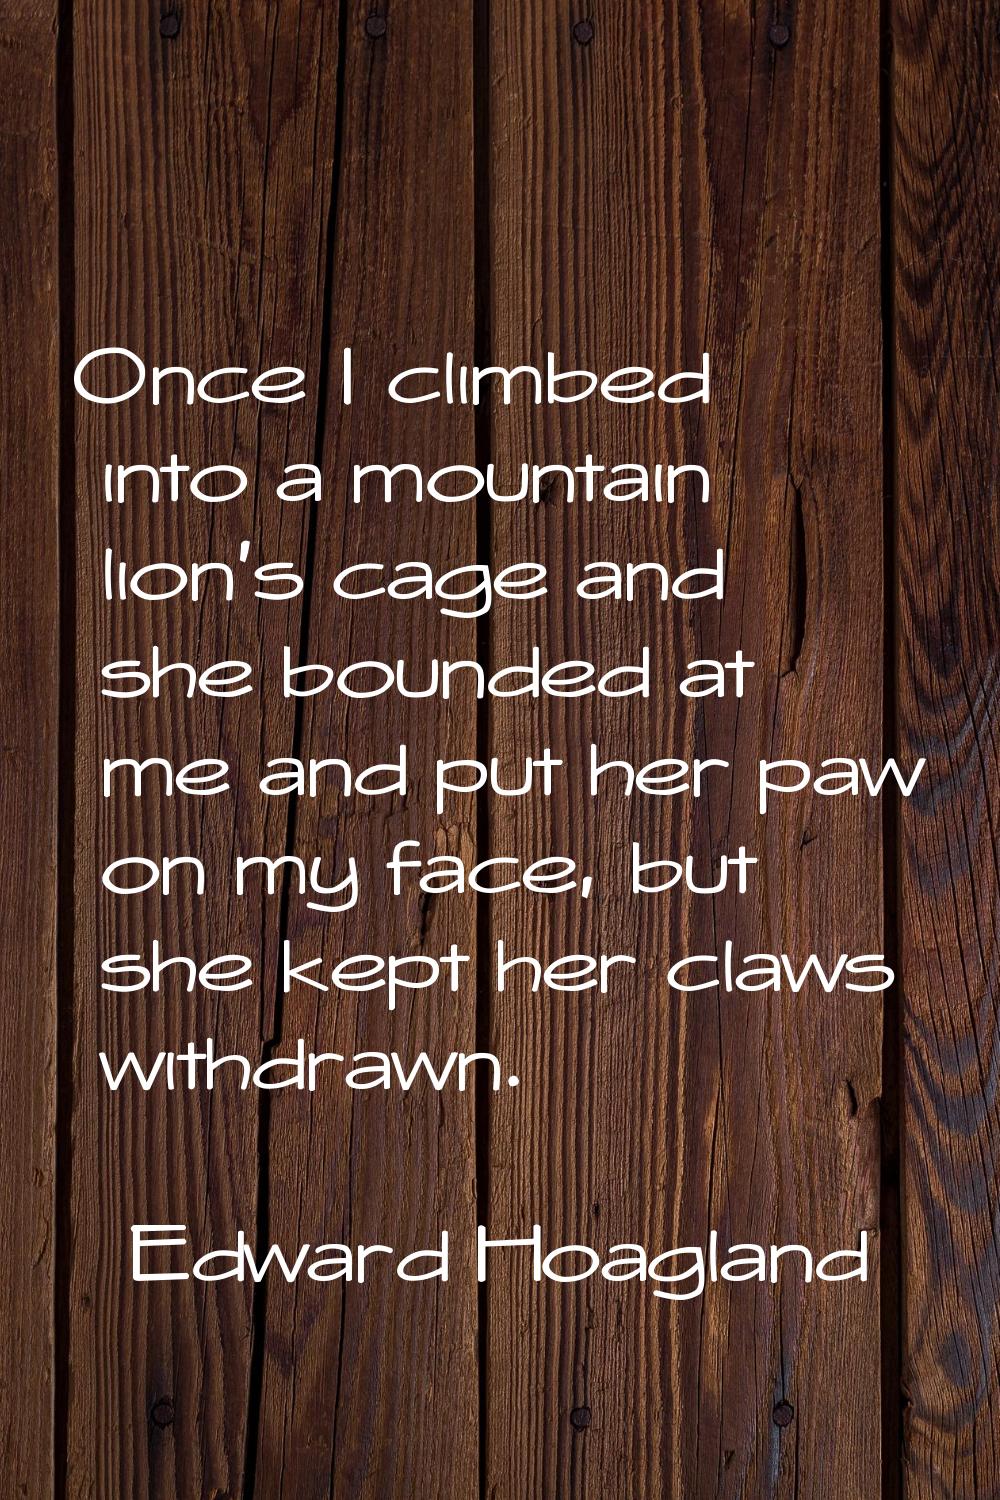 Once I climbed into a mountain lion's cage and she bounded at me and put her paw on my face, but sh